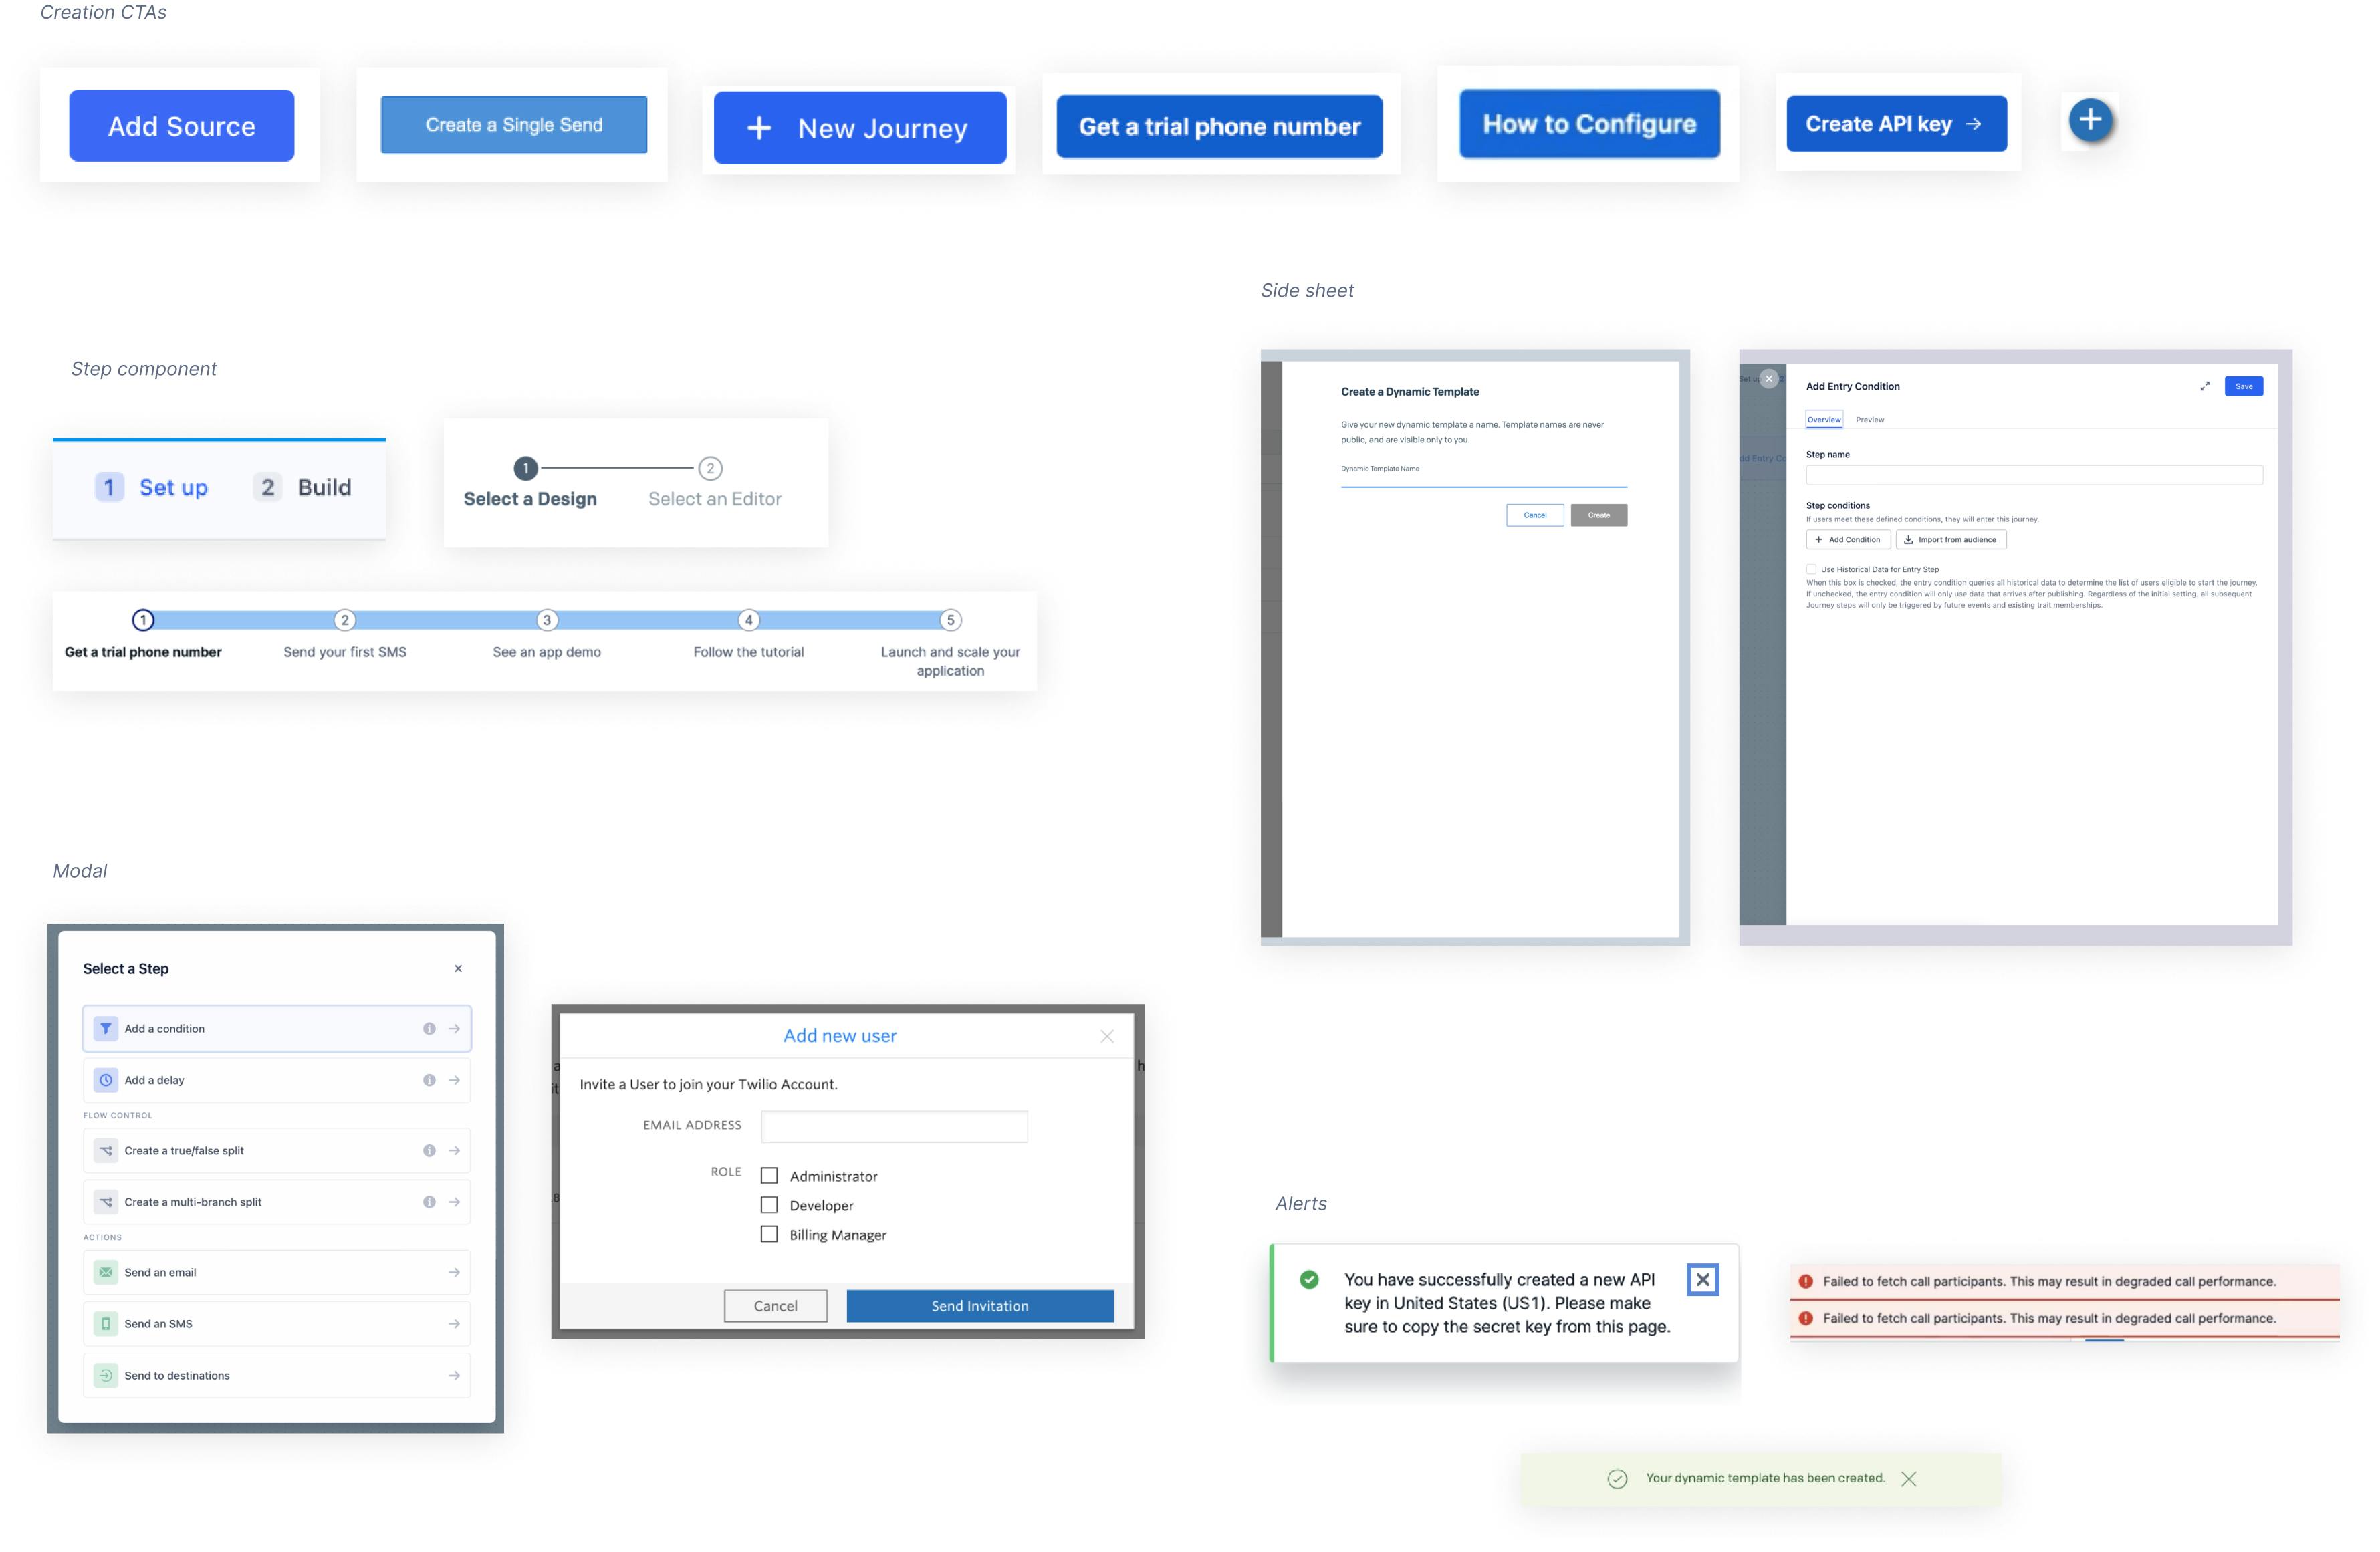 Screenshots of creation flows from across Segment, SendGrid, Console, and Flex, including 7 ever-so-slightly different blue primary buttons.